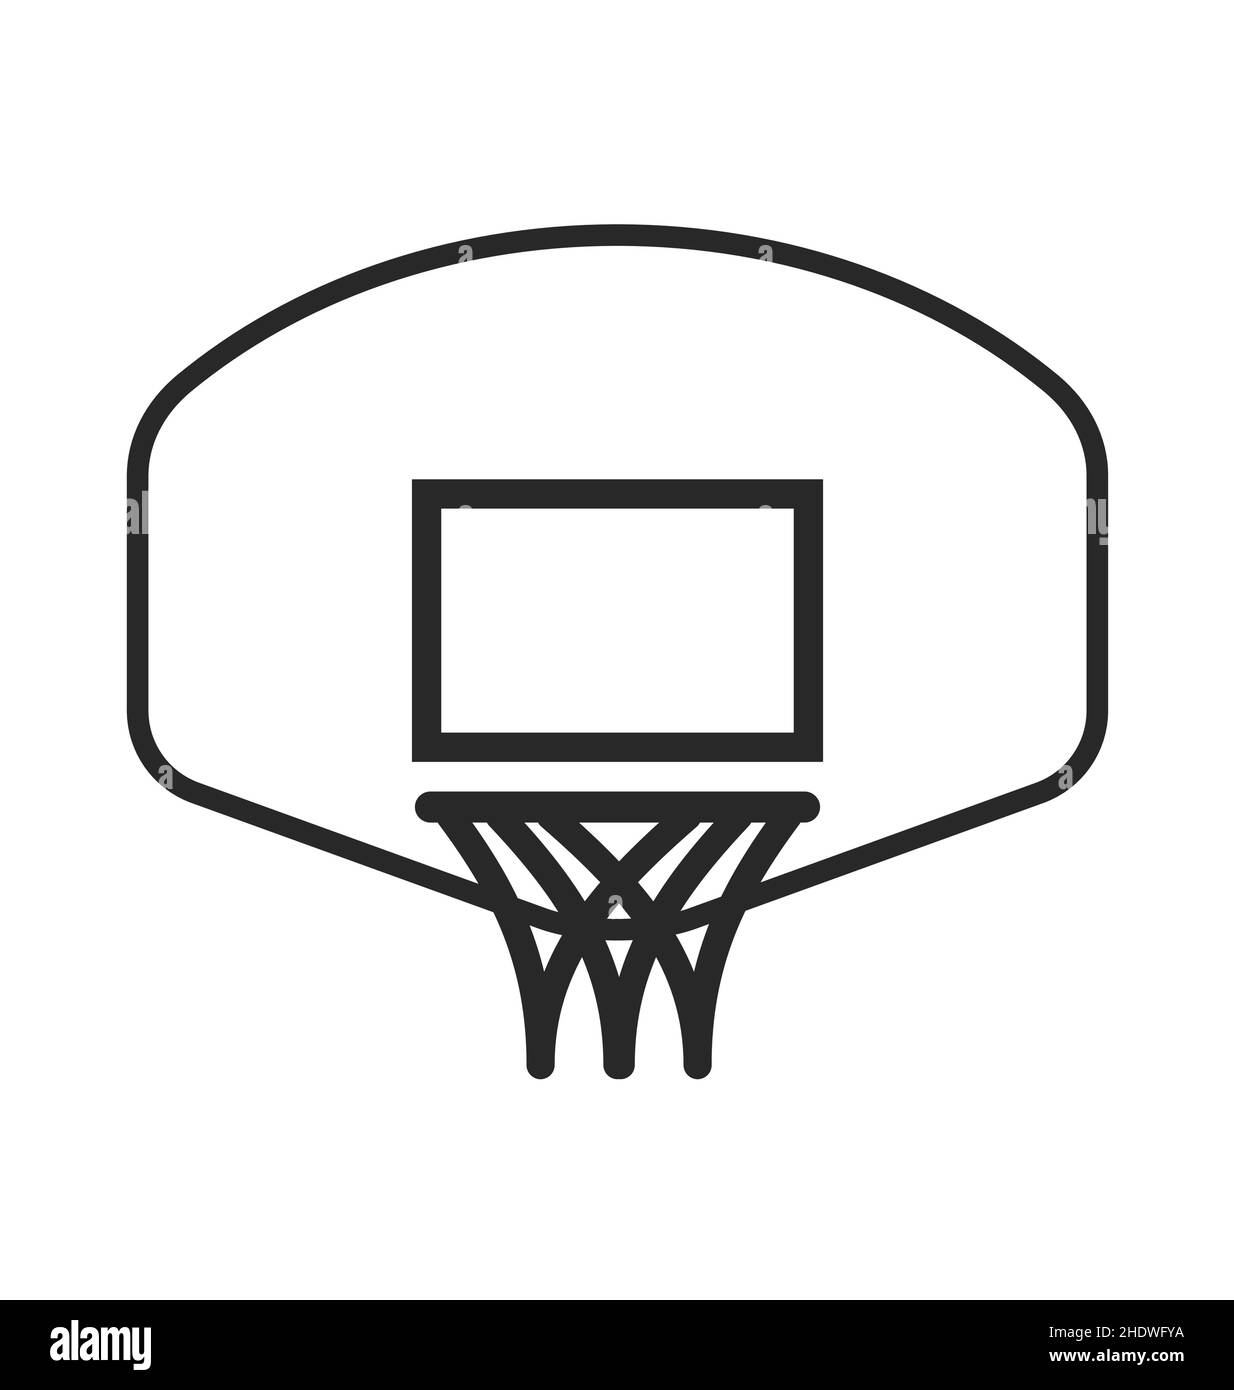 Basketball net side Black and White Stock Photos & Images - Alamy